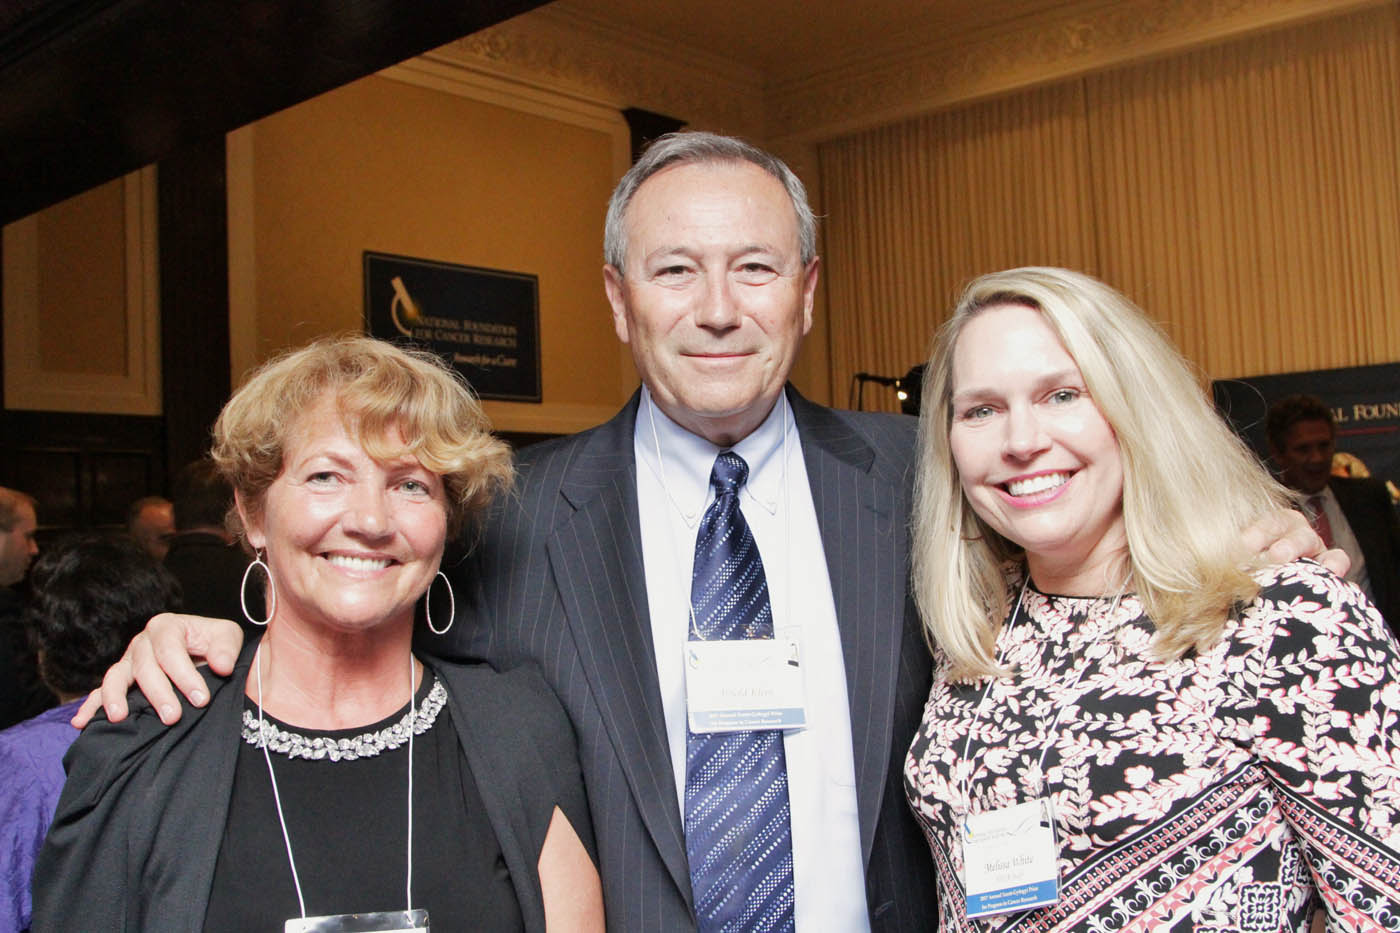 NFCR’s Melissa White along with supporters Arnold and Helen Klein